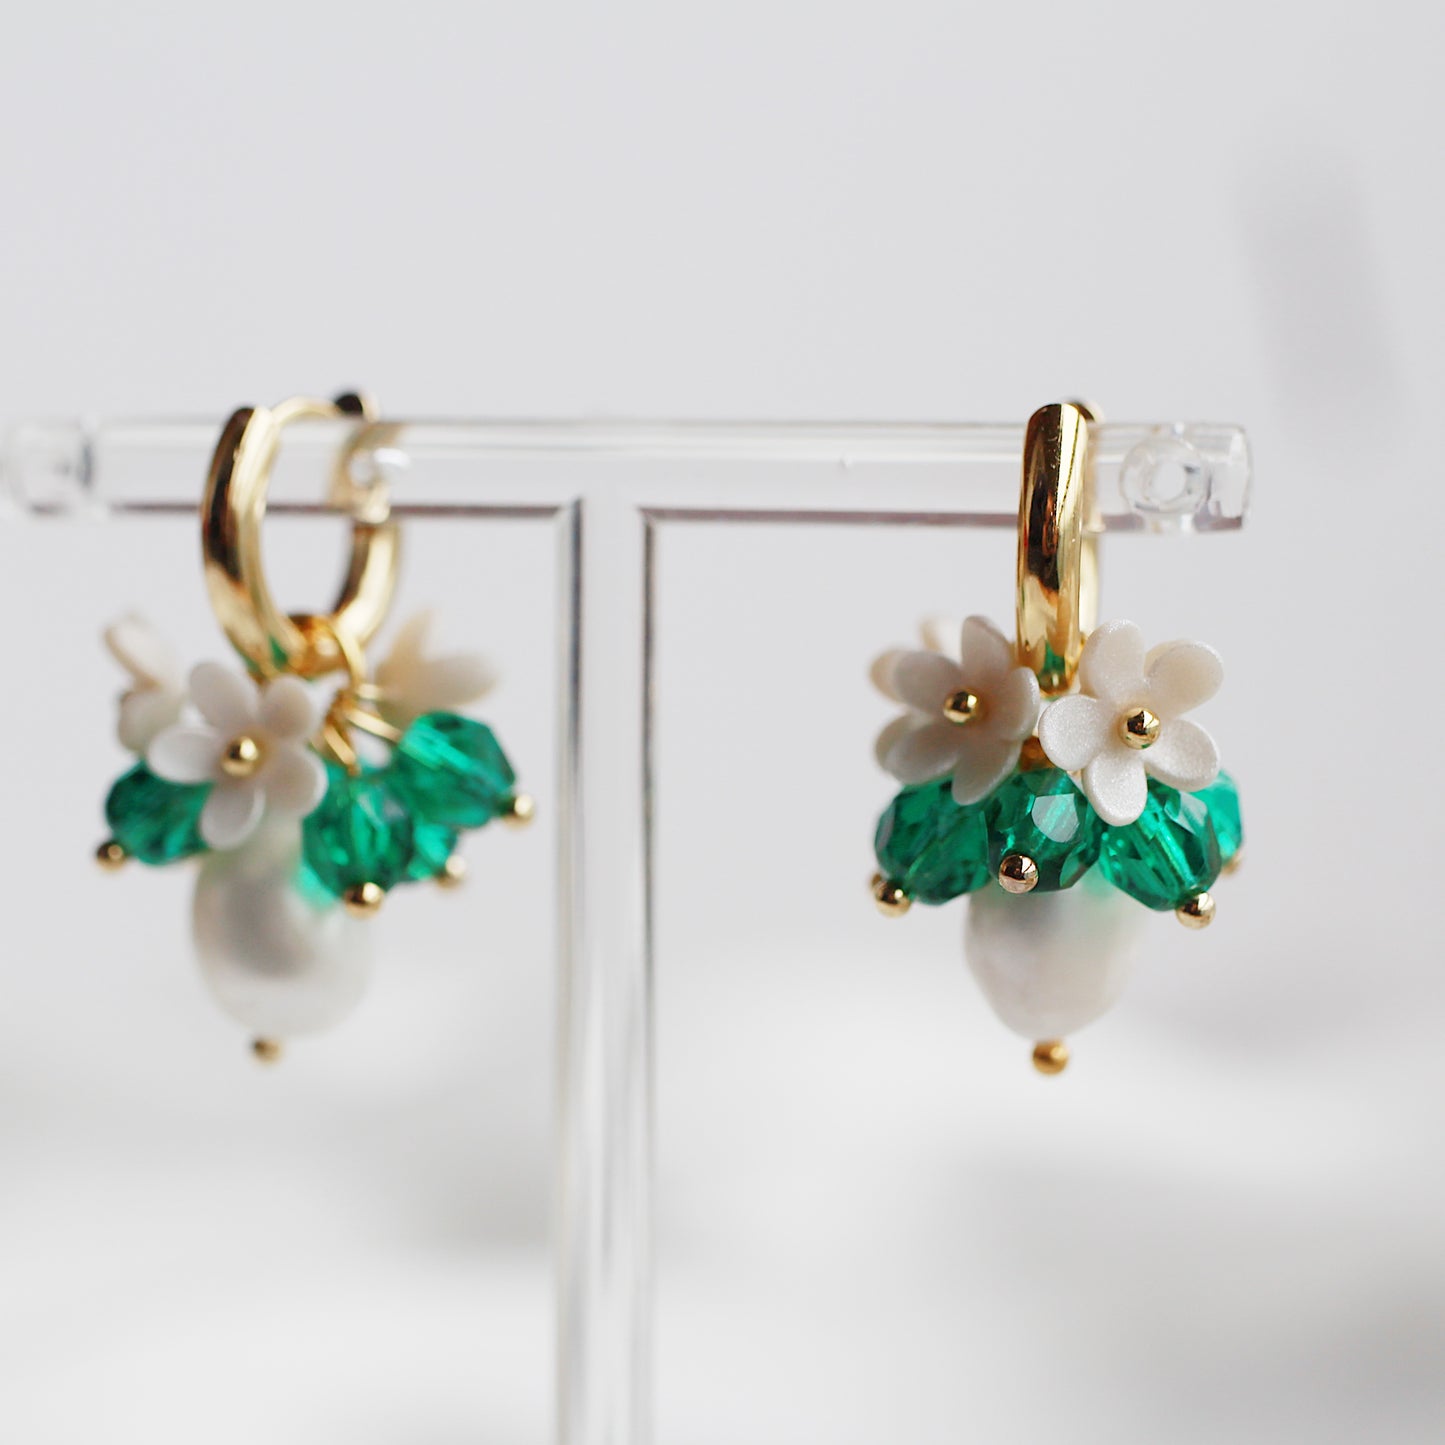 PRE-ORDER: Mindy in Emerald green, charms only